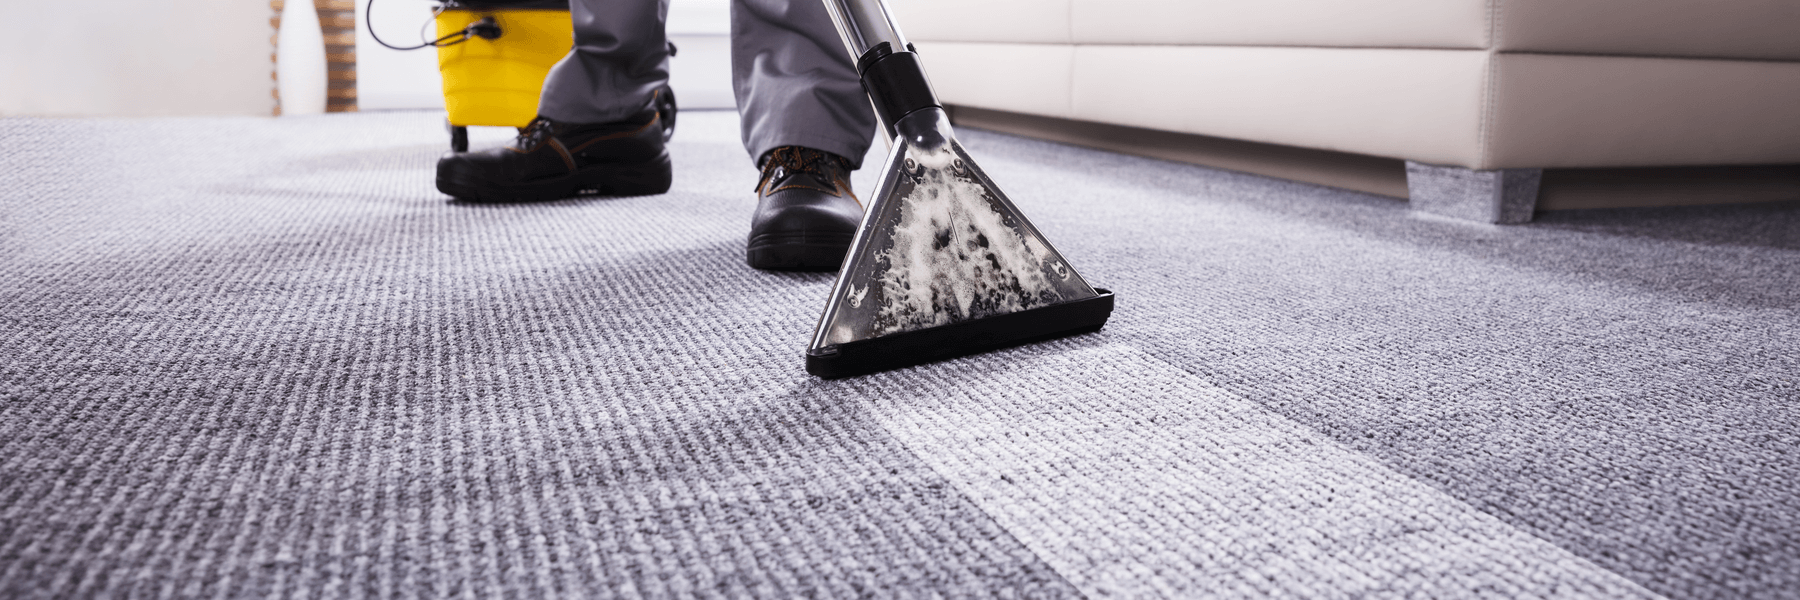 Professional carpet cleaner deep cleaning office carpet